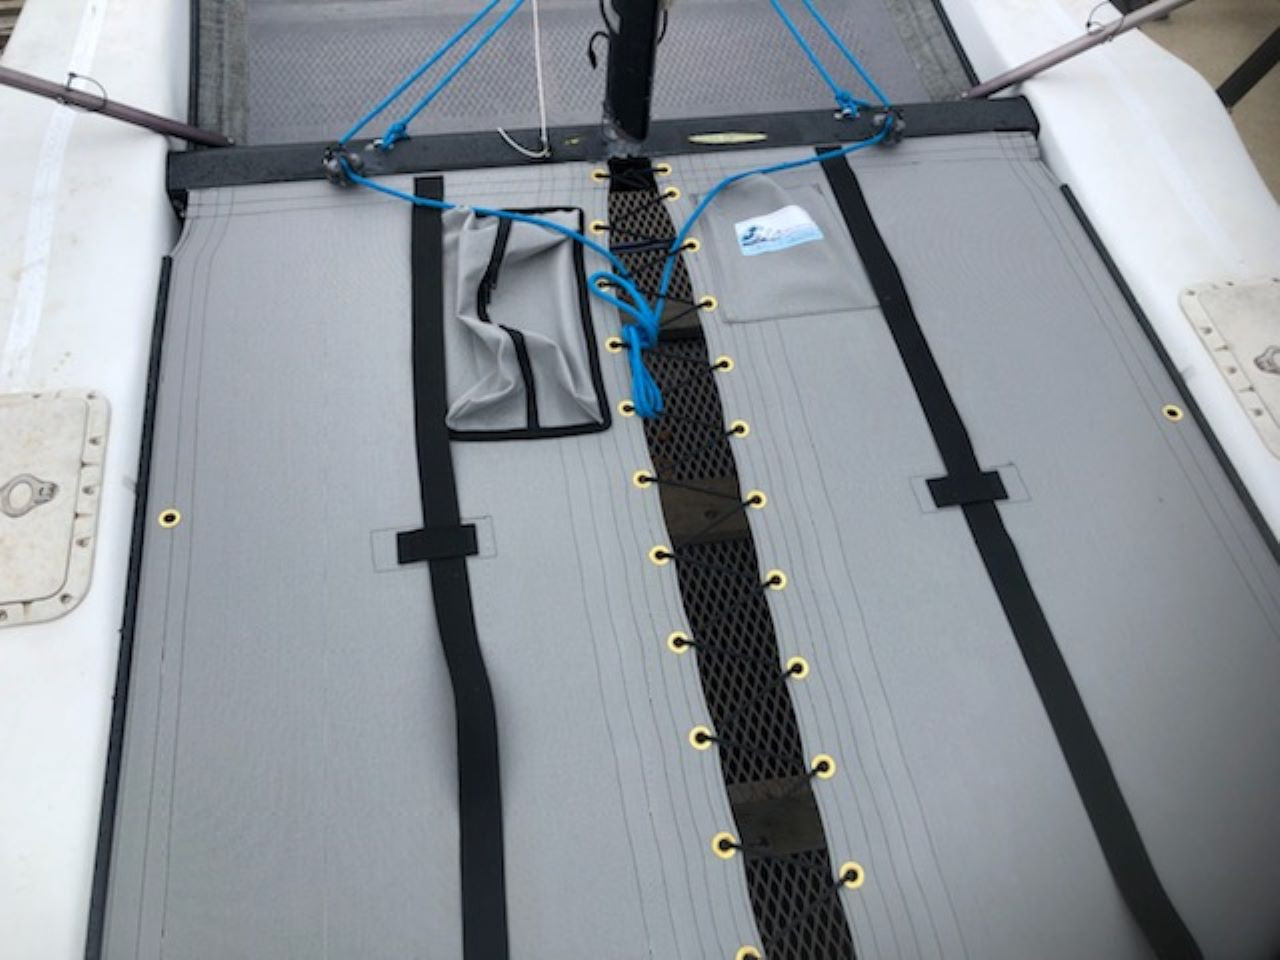 2pc Trampoline to fit a Hobie Getaway catamaran made in America by skilled artisans at SLO Sail and Canvas. 12” X 12” halyard pocket, included. Hand pounded #4 brass spur grommets. Adjustable hiking straps made of 3” Polypropylene webbing. Shown in Textilene 90 Dusk Grey premium mesh. Optional Upgrade: Zipper Pocket shown.